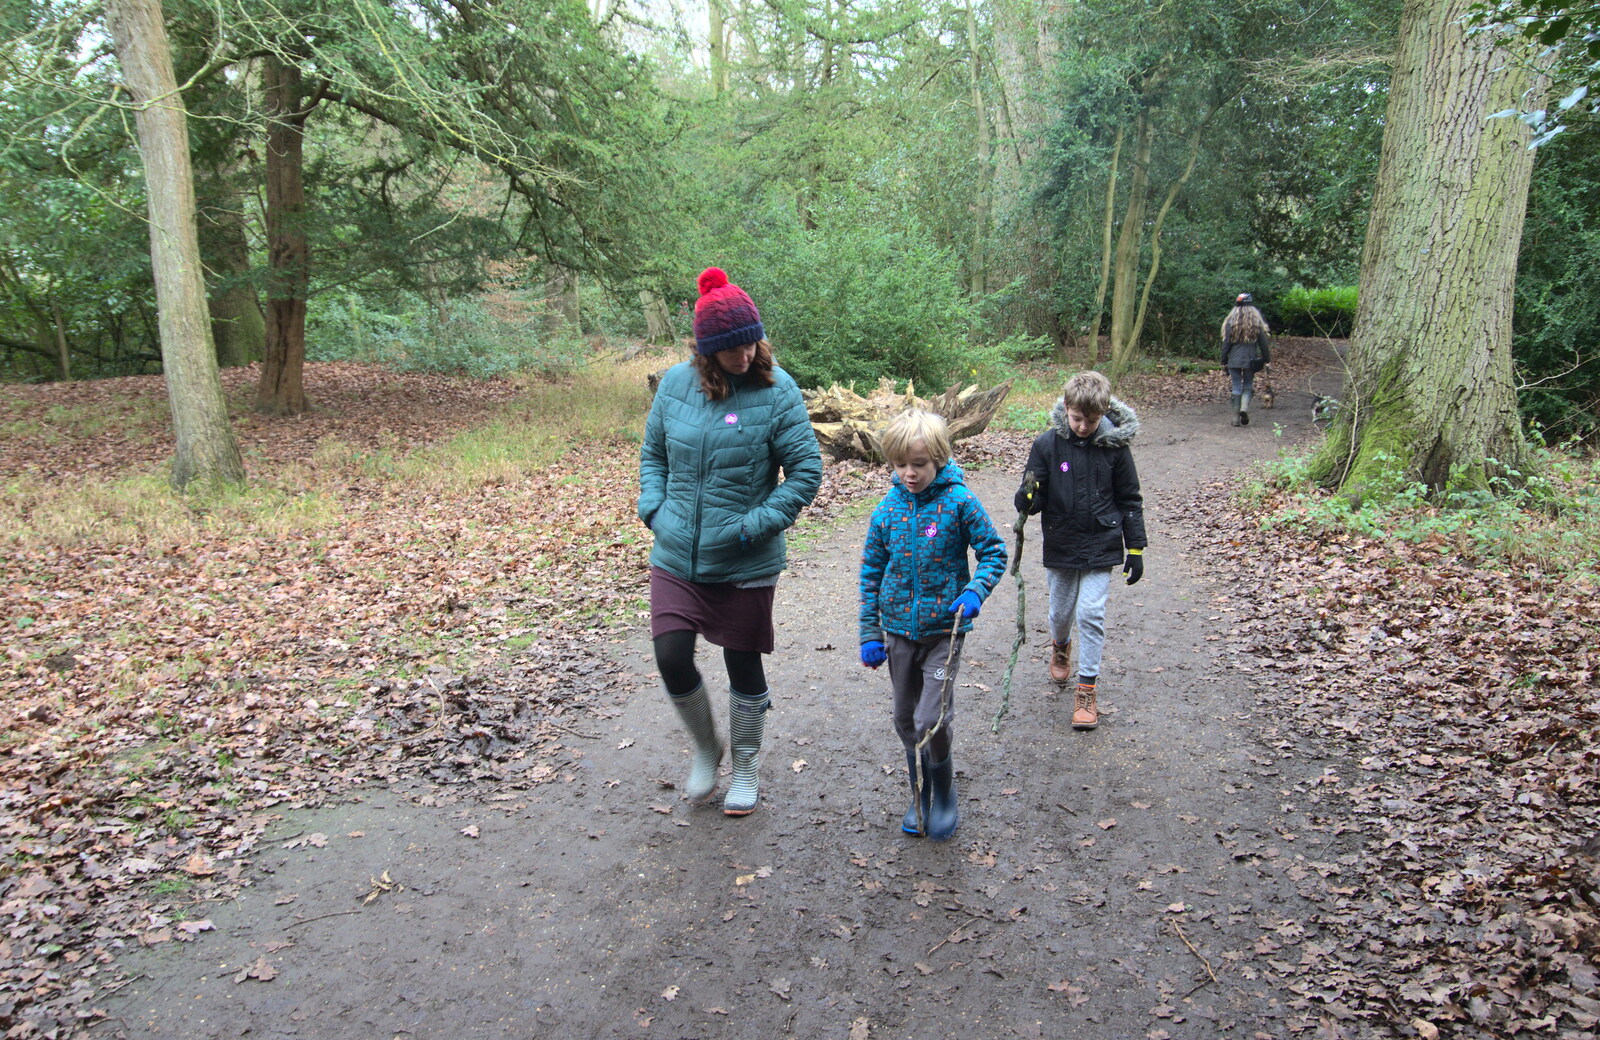 The gang wander through the woods from Ickworth House, Horringer, Suffolk - 29th December 2018